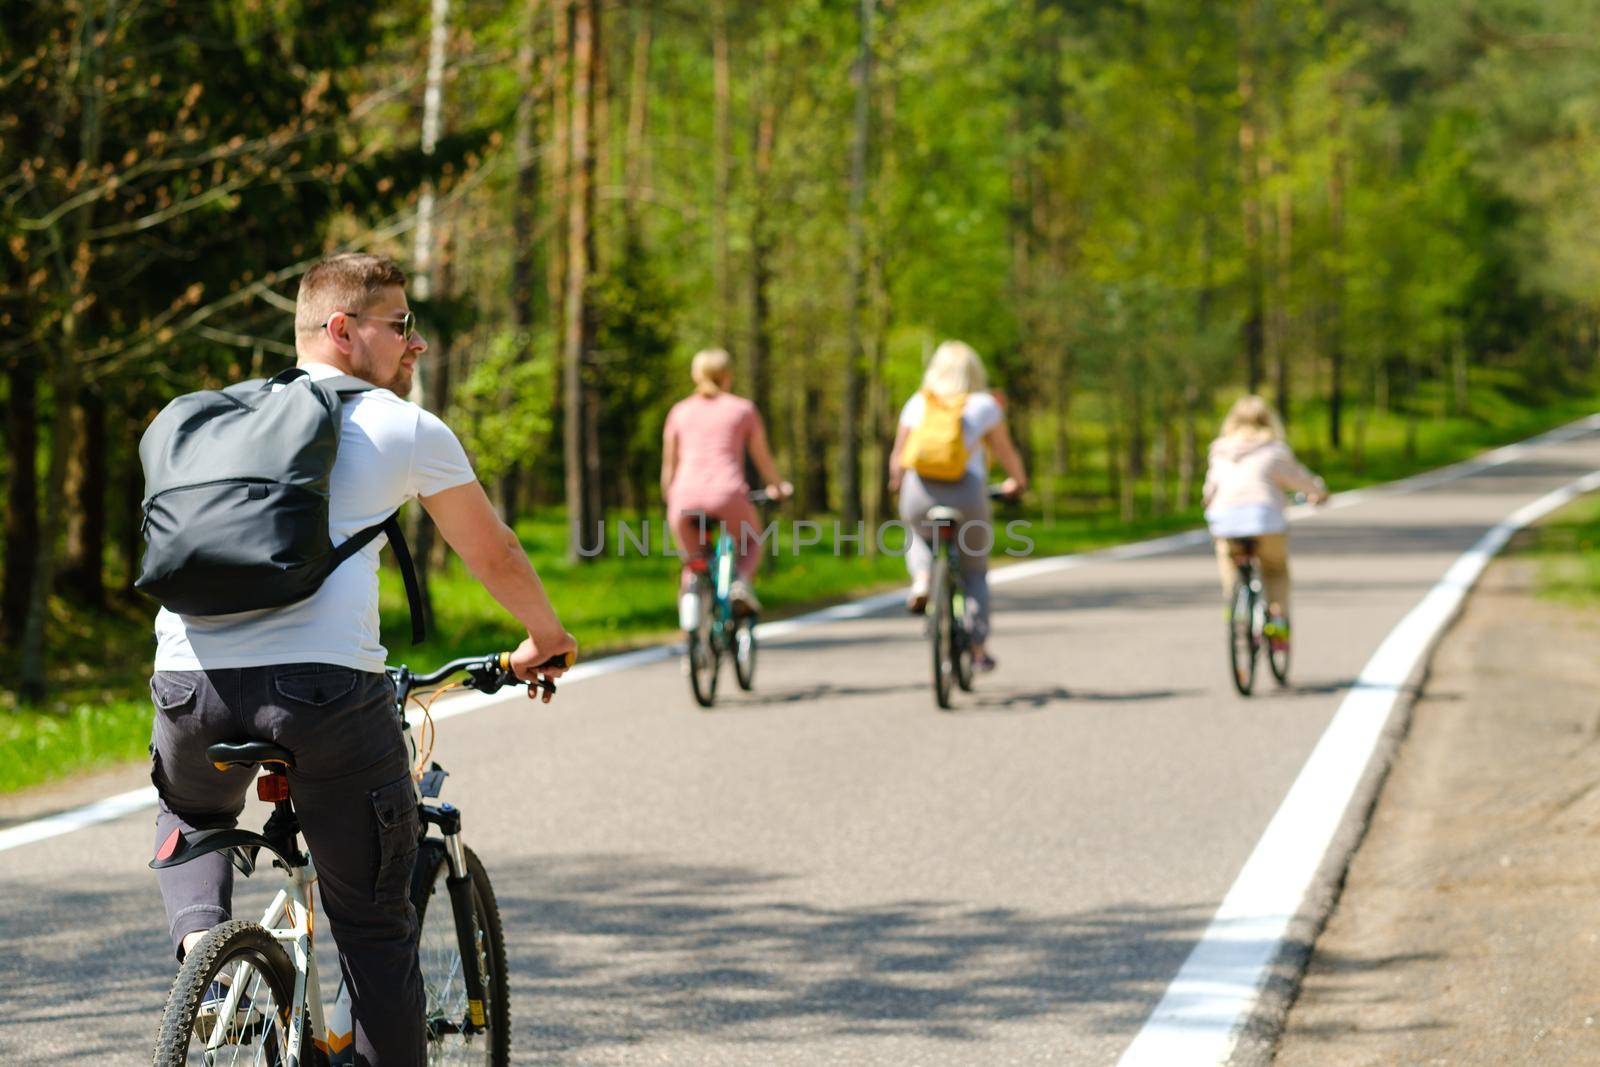 A group of cyclists with backpacks ride bicycles on a forest road enjoying nature by Lobachad